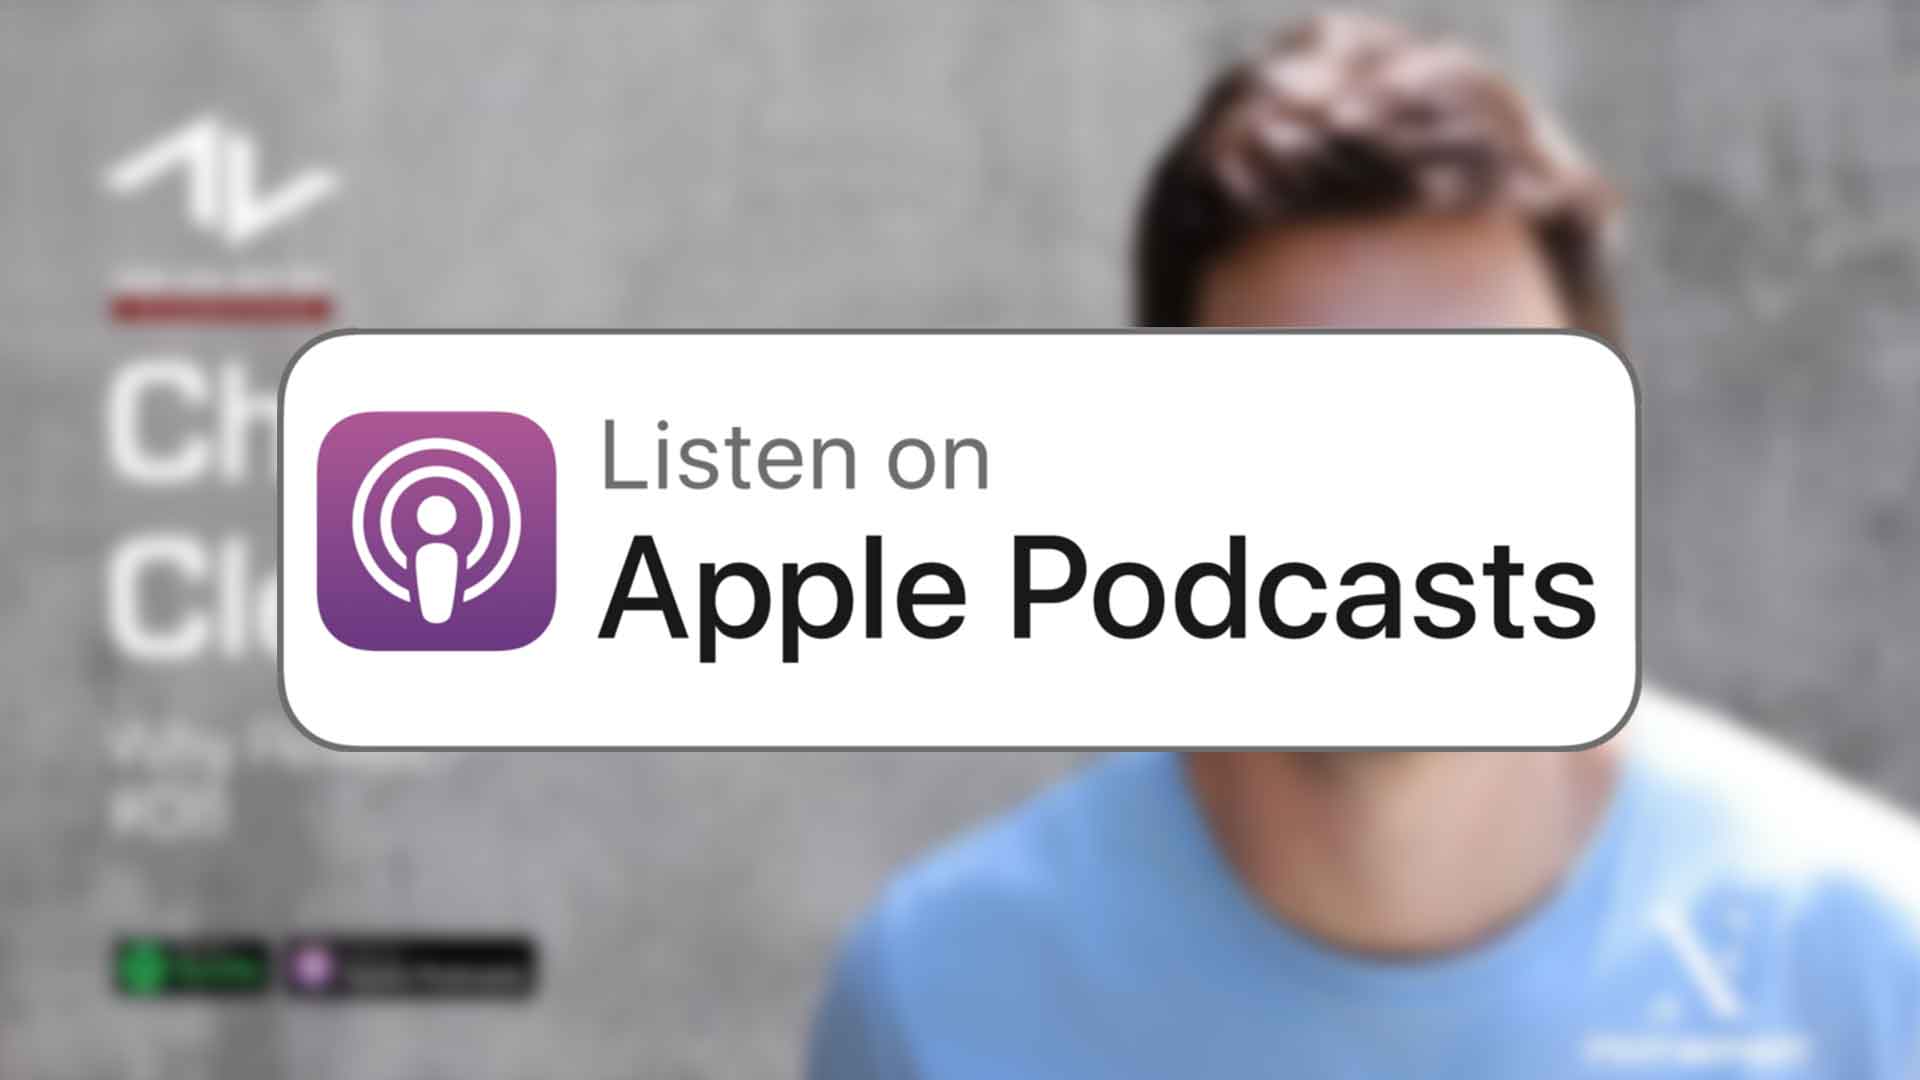 Listen to episode 8 of Ask An Artist on Apple Podcasts.